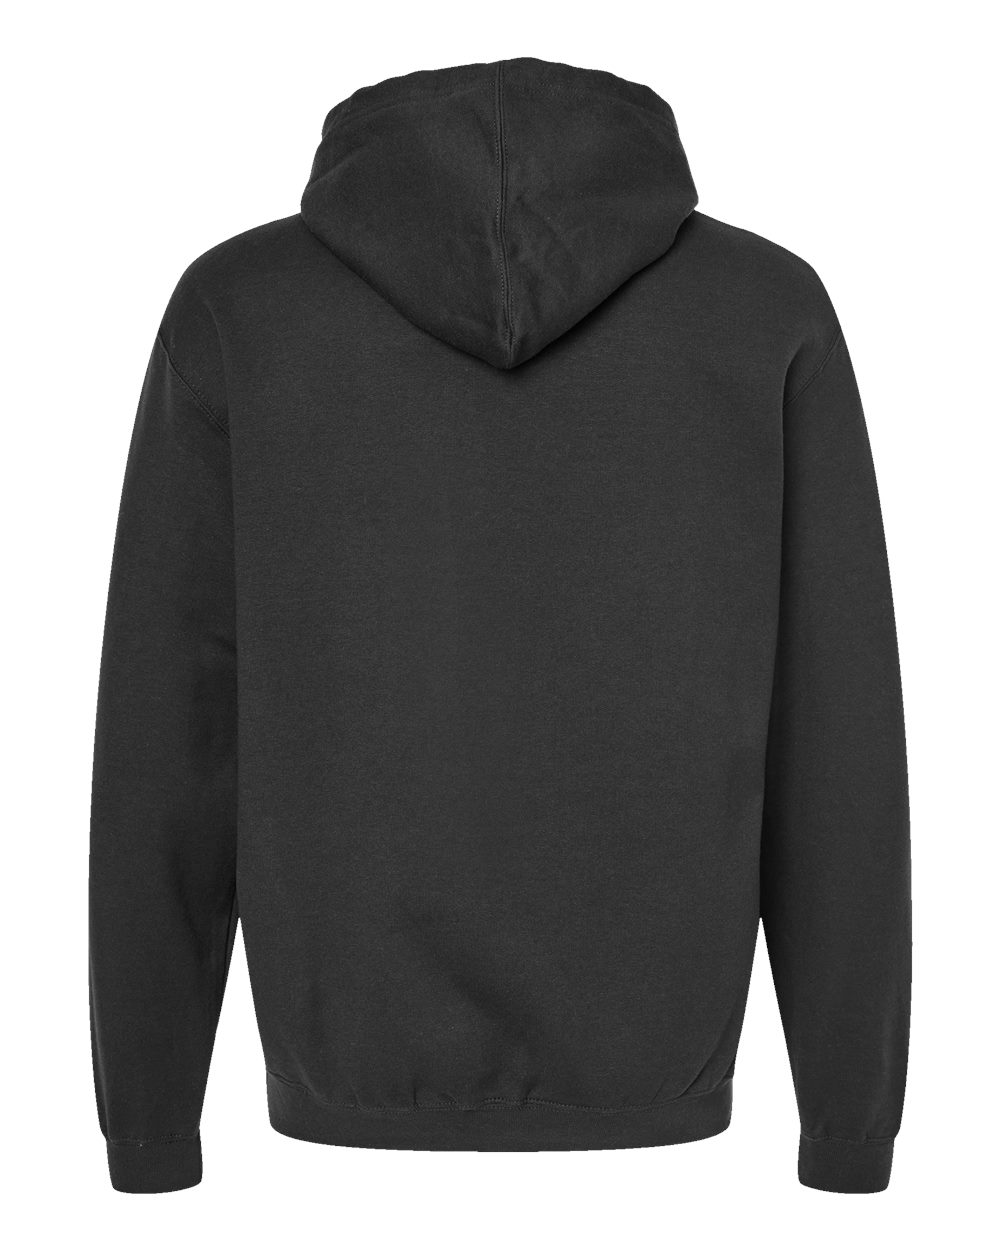 Outpost Hoodie